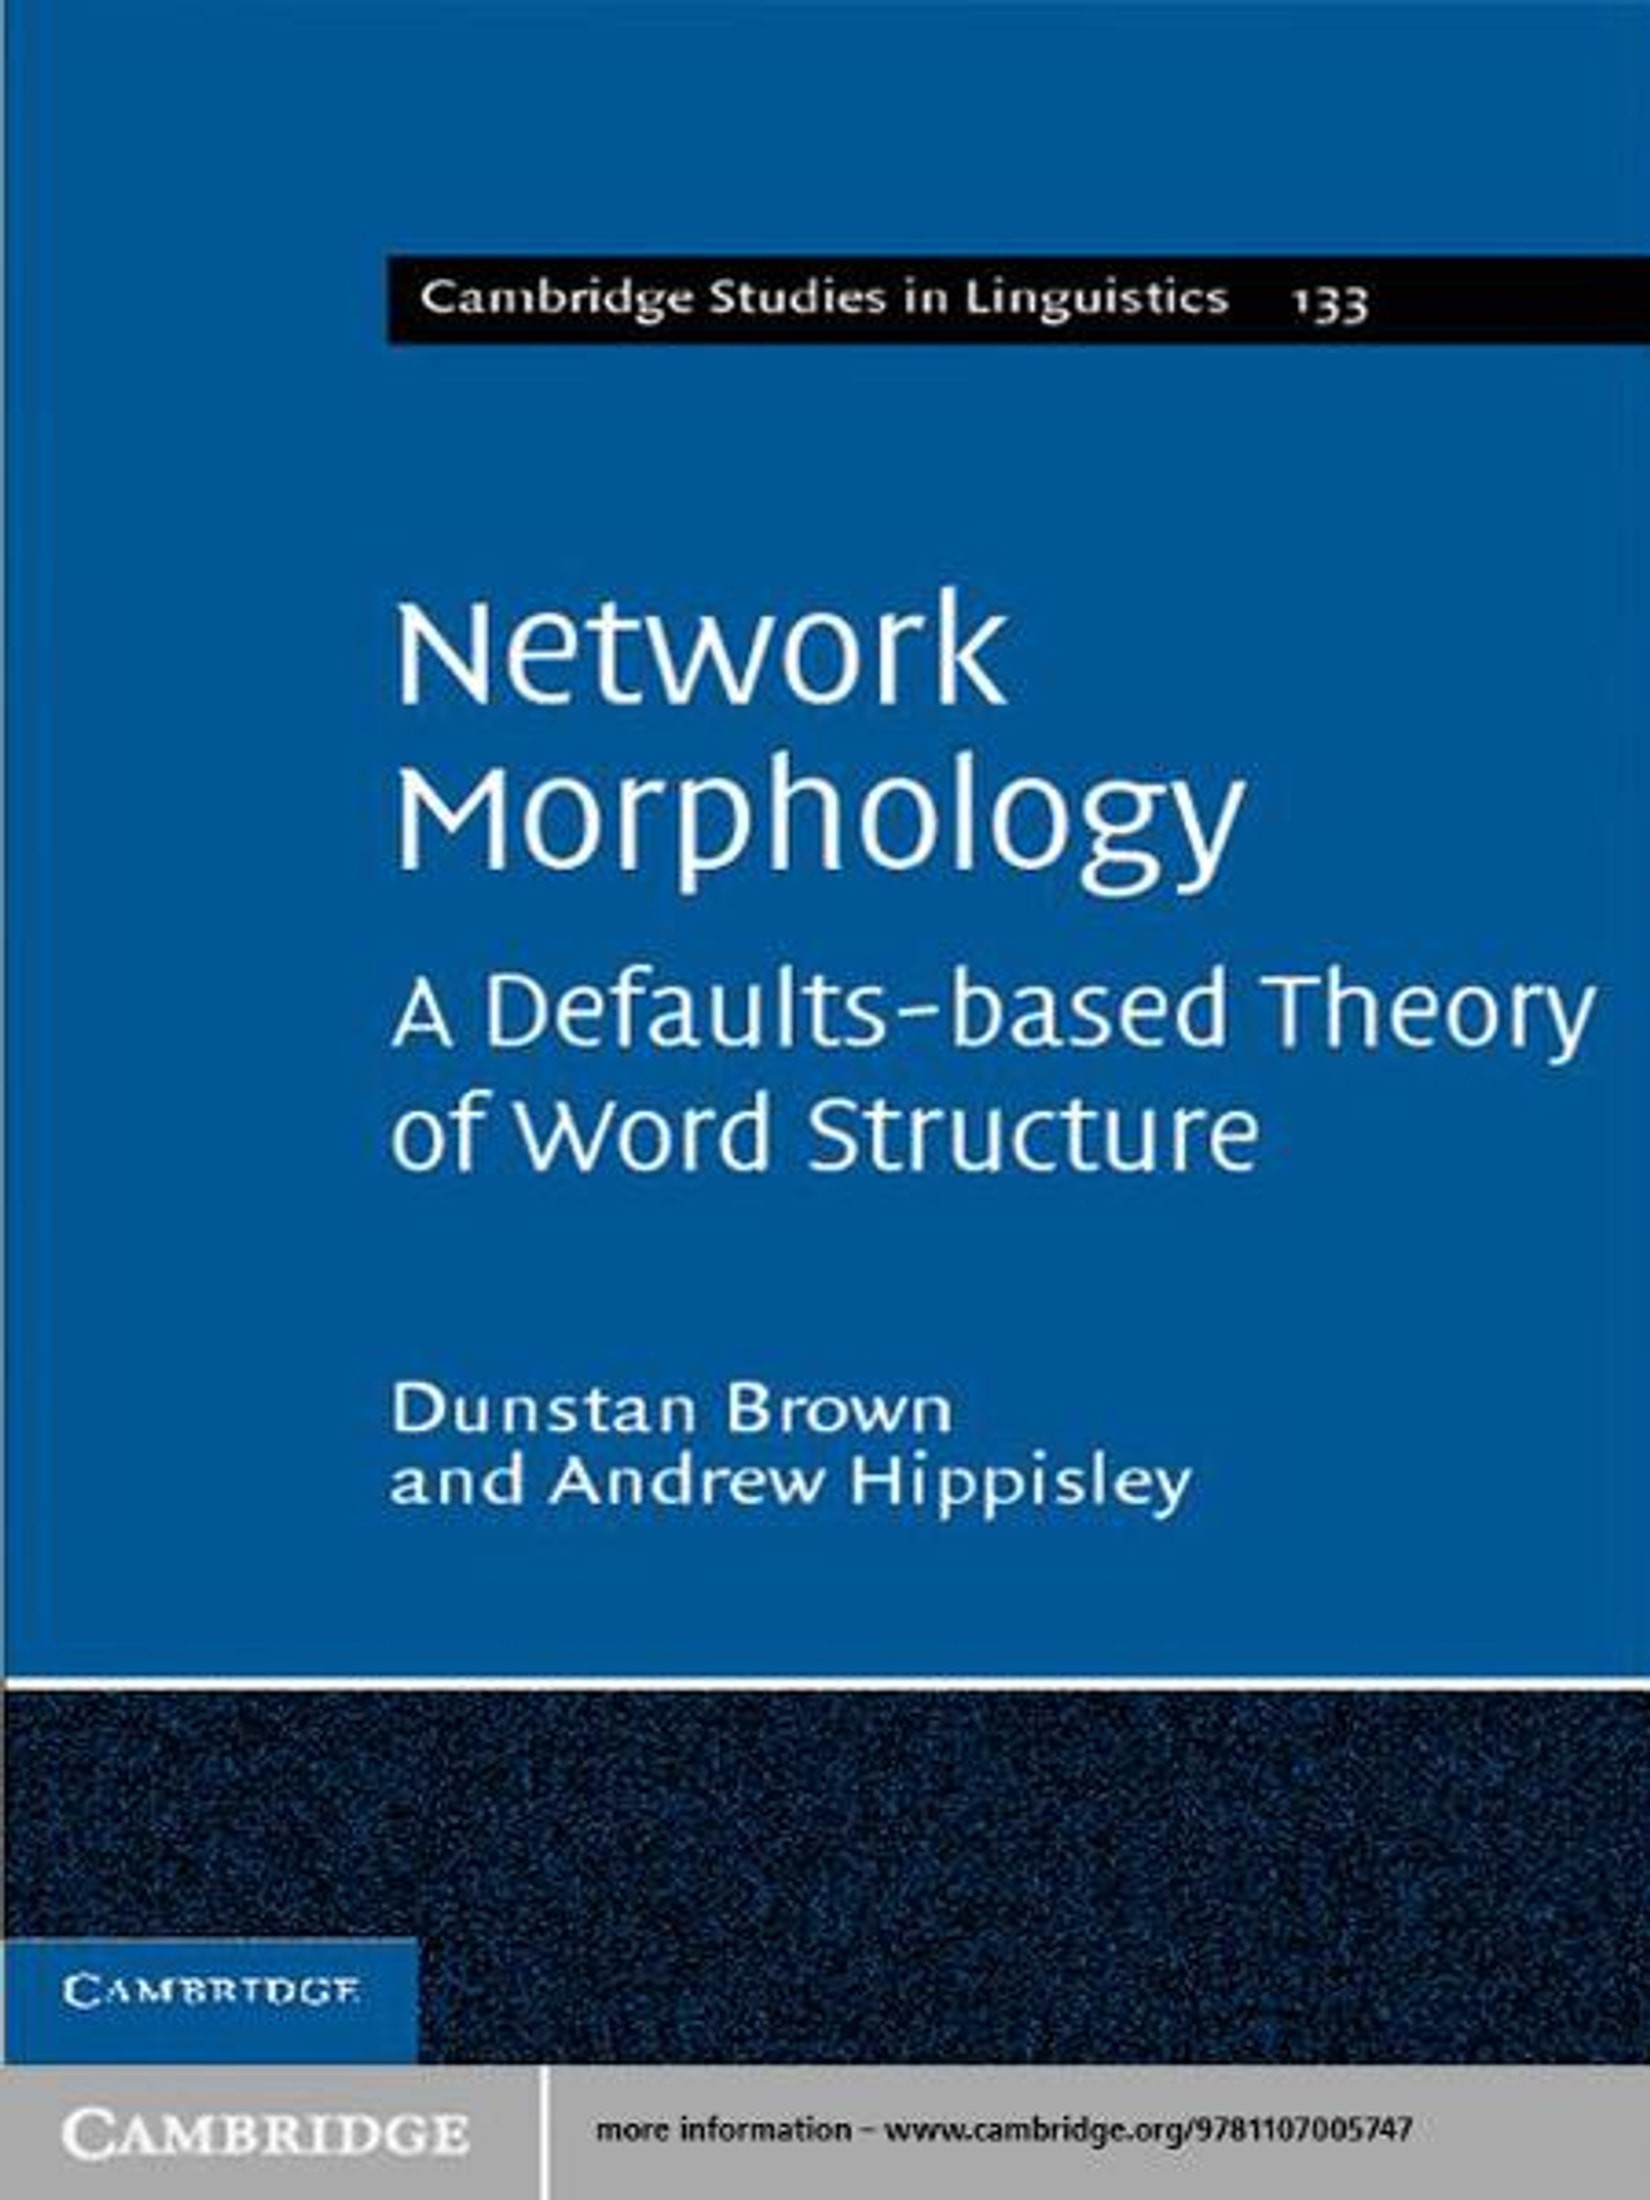 Network Morphology: A Defaults-Based Theory of Word Structure